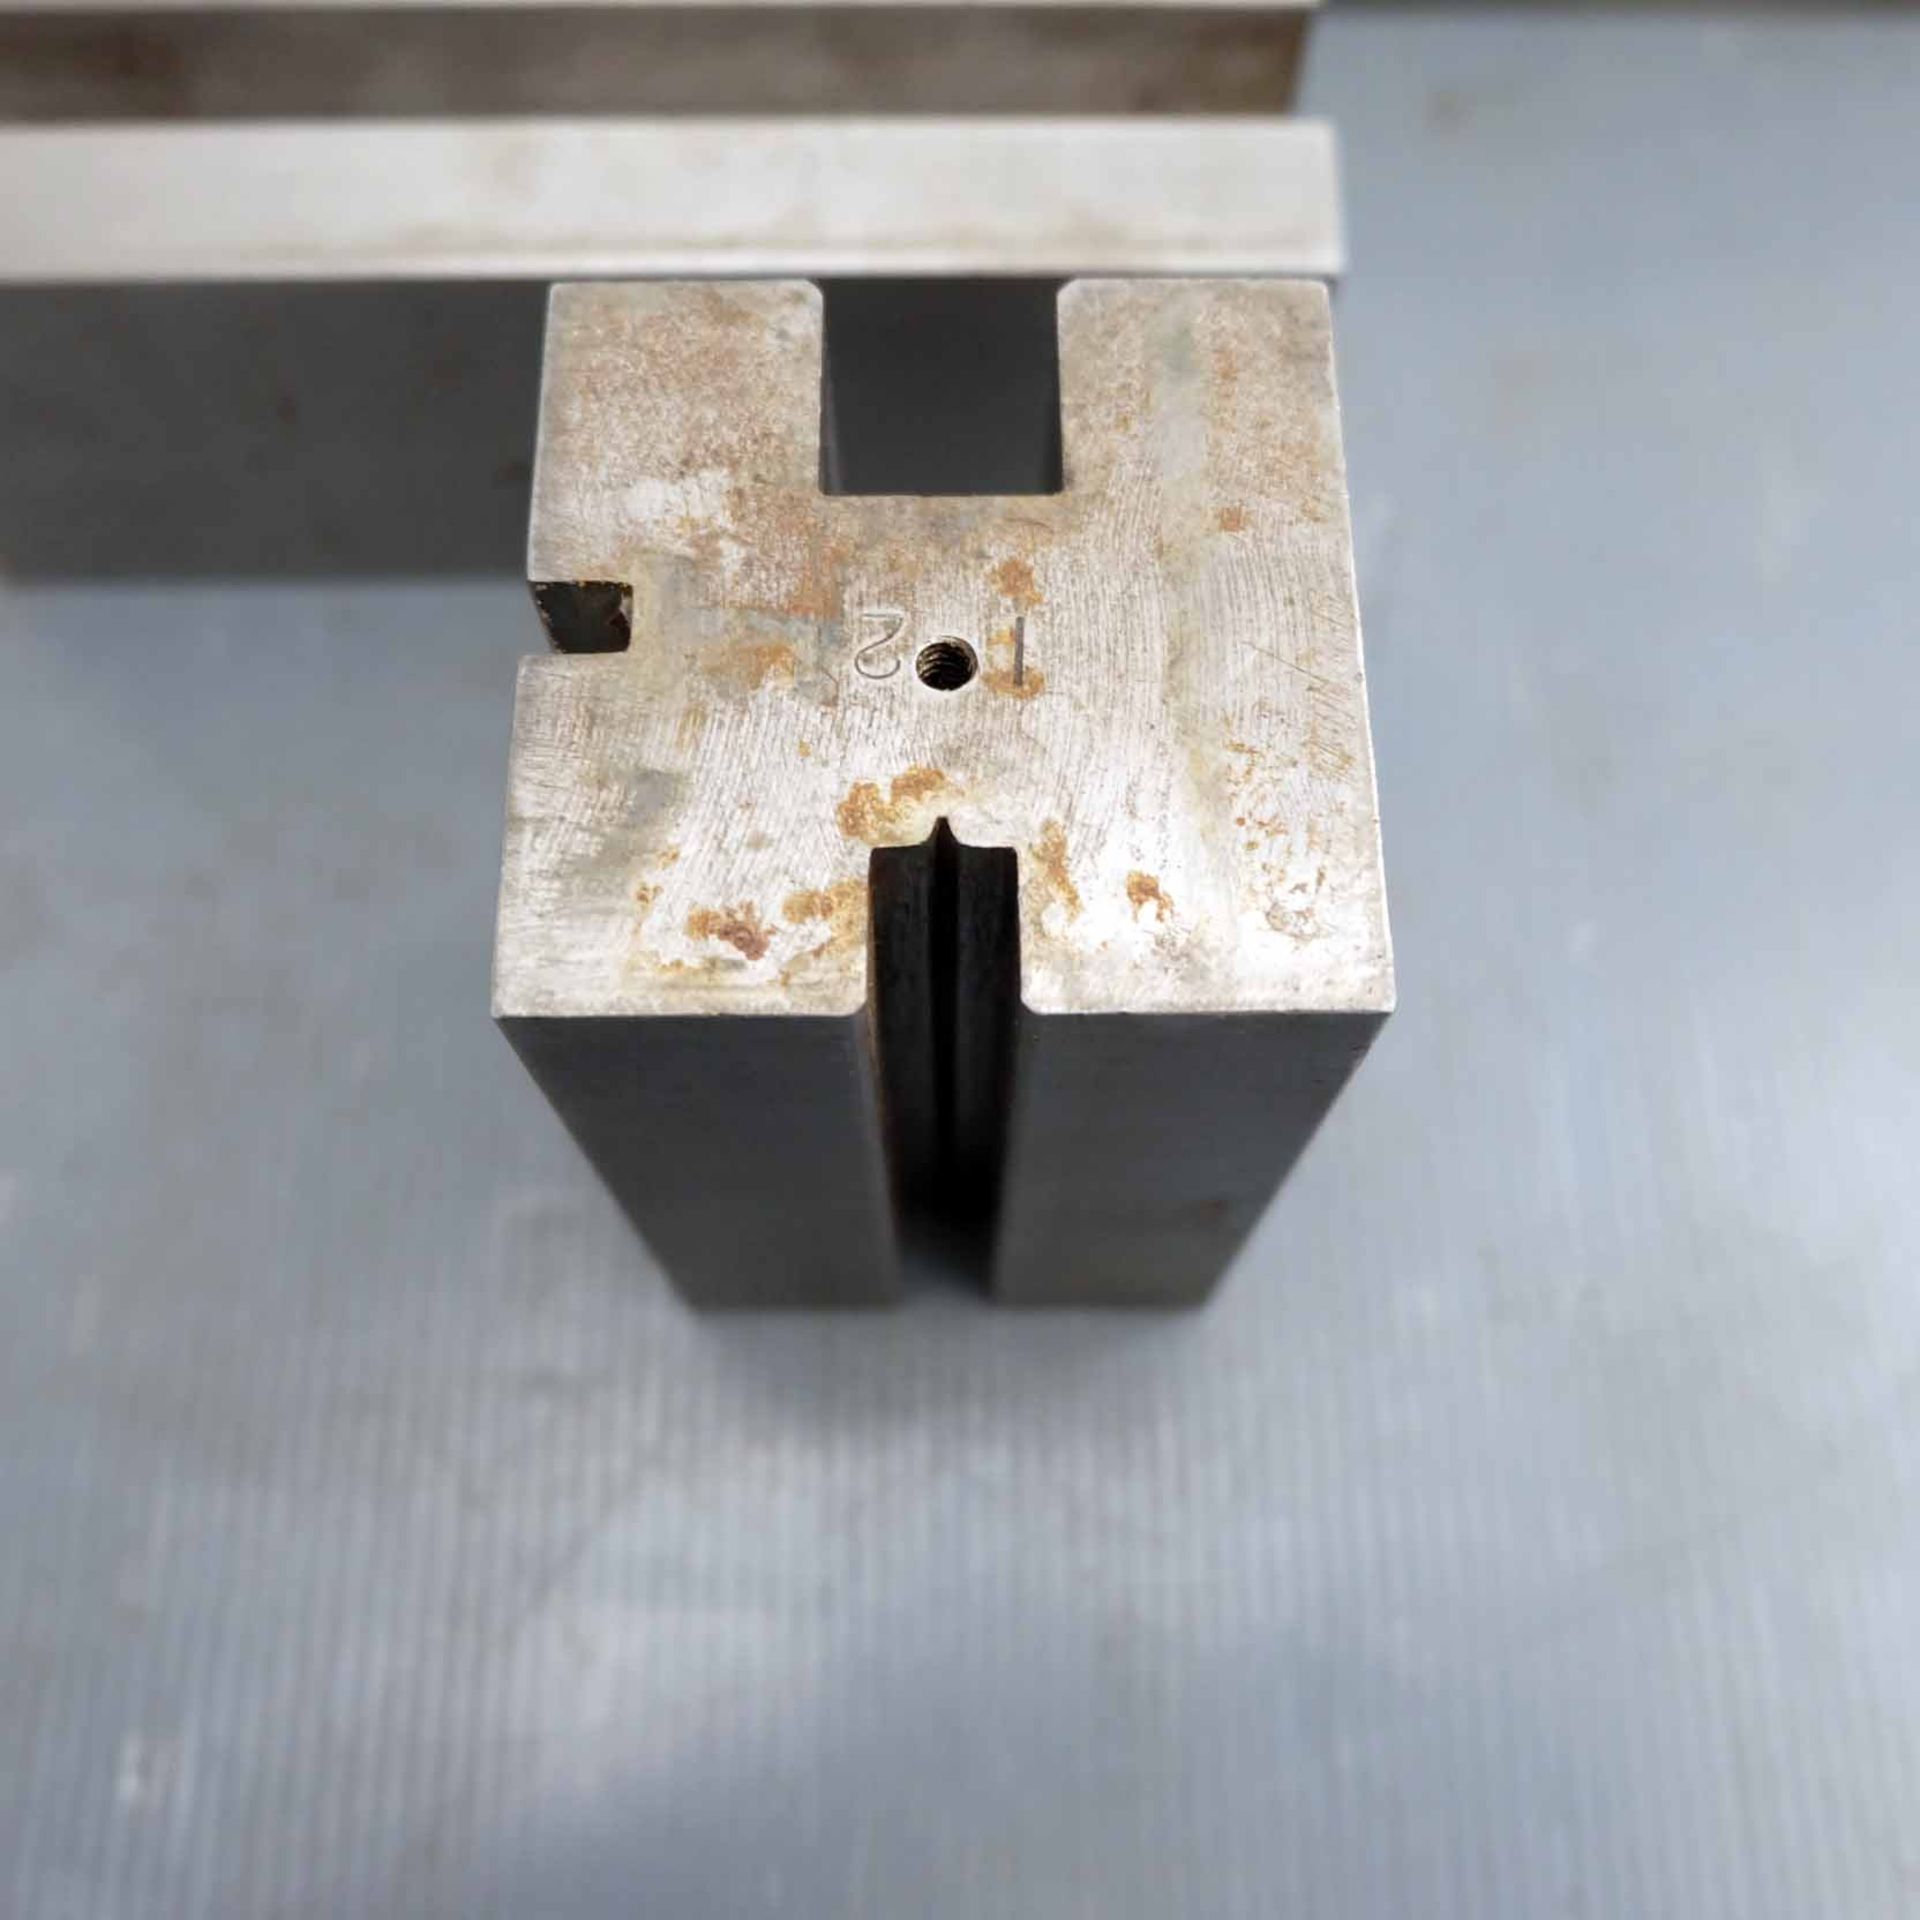 60mm Square Bottom Press Brake Tooling. With 3 Grooves: 6mm, 10mm, 18mm. Lengths 75mm, 100mm, 166mm, - Image 8 of 8